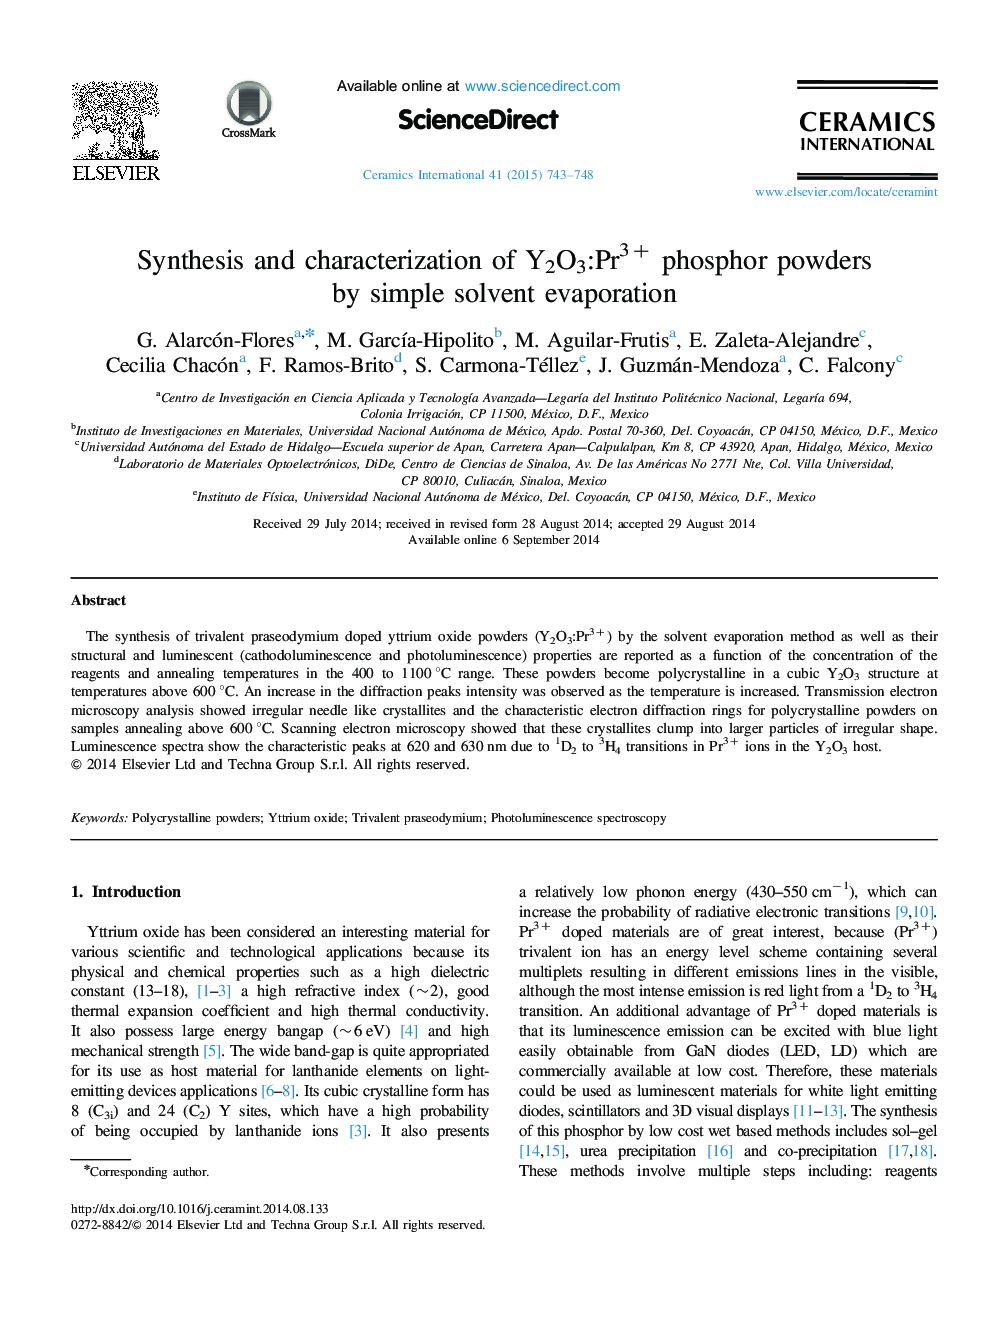 Synthesis and characterization of Y2O3:Pr3+ phosphor powders by simple solvent evaporation